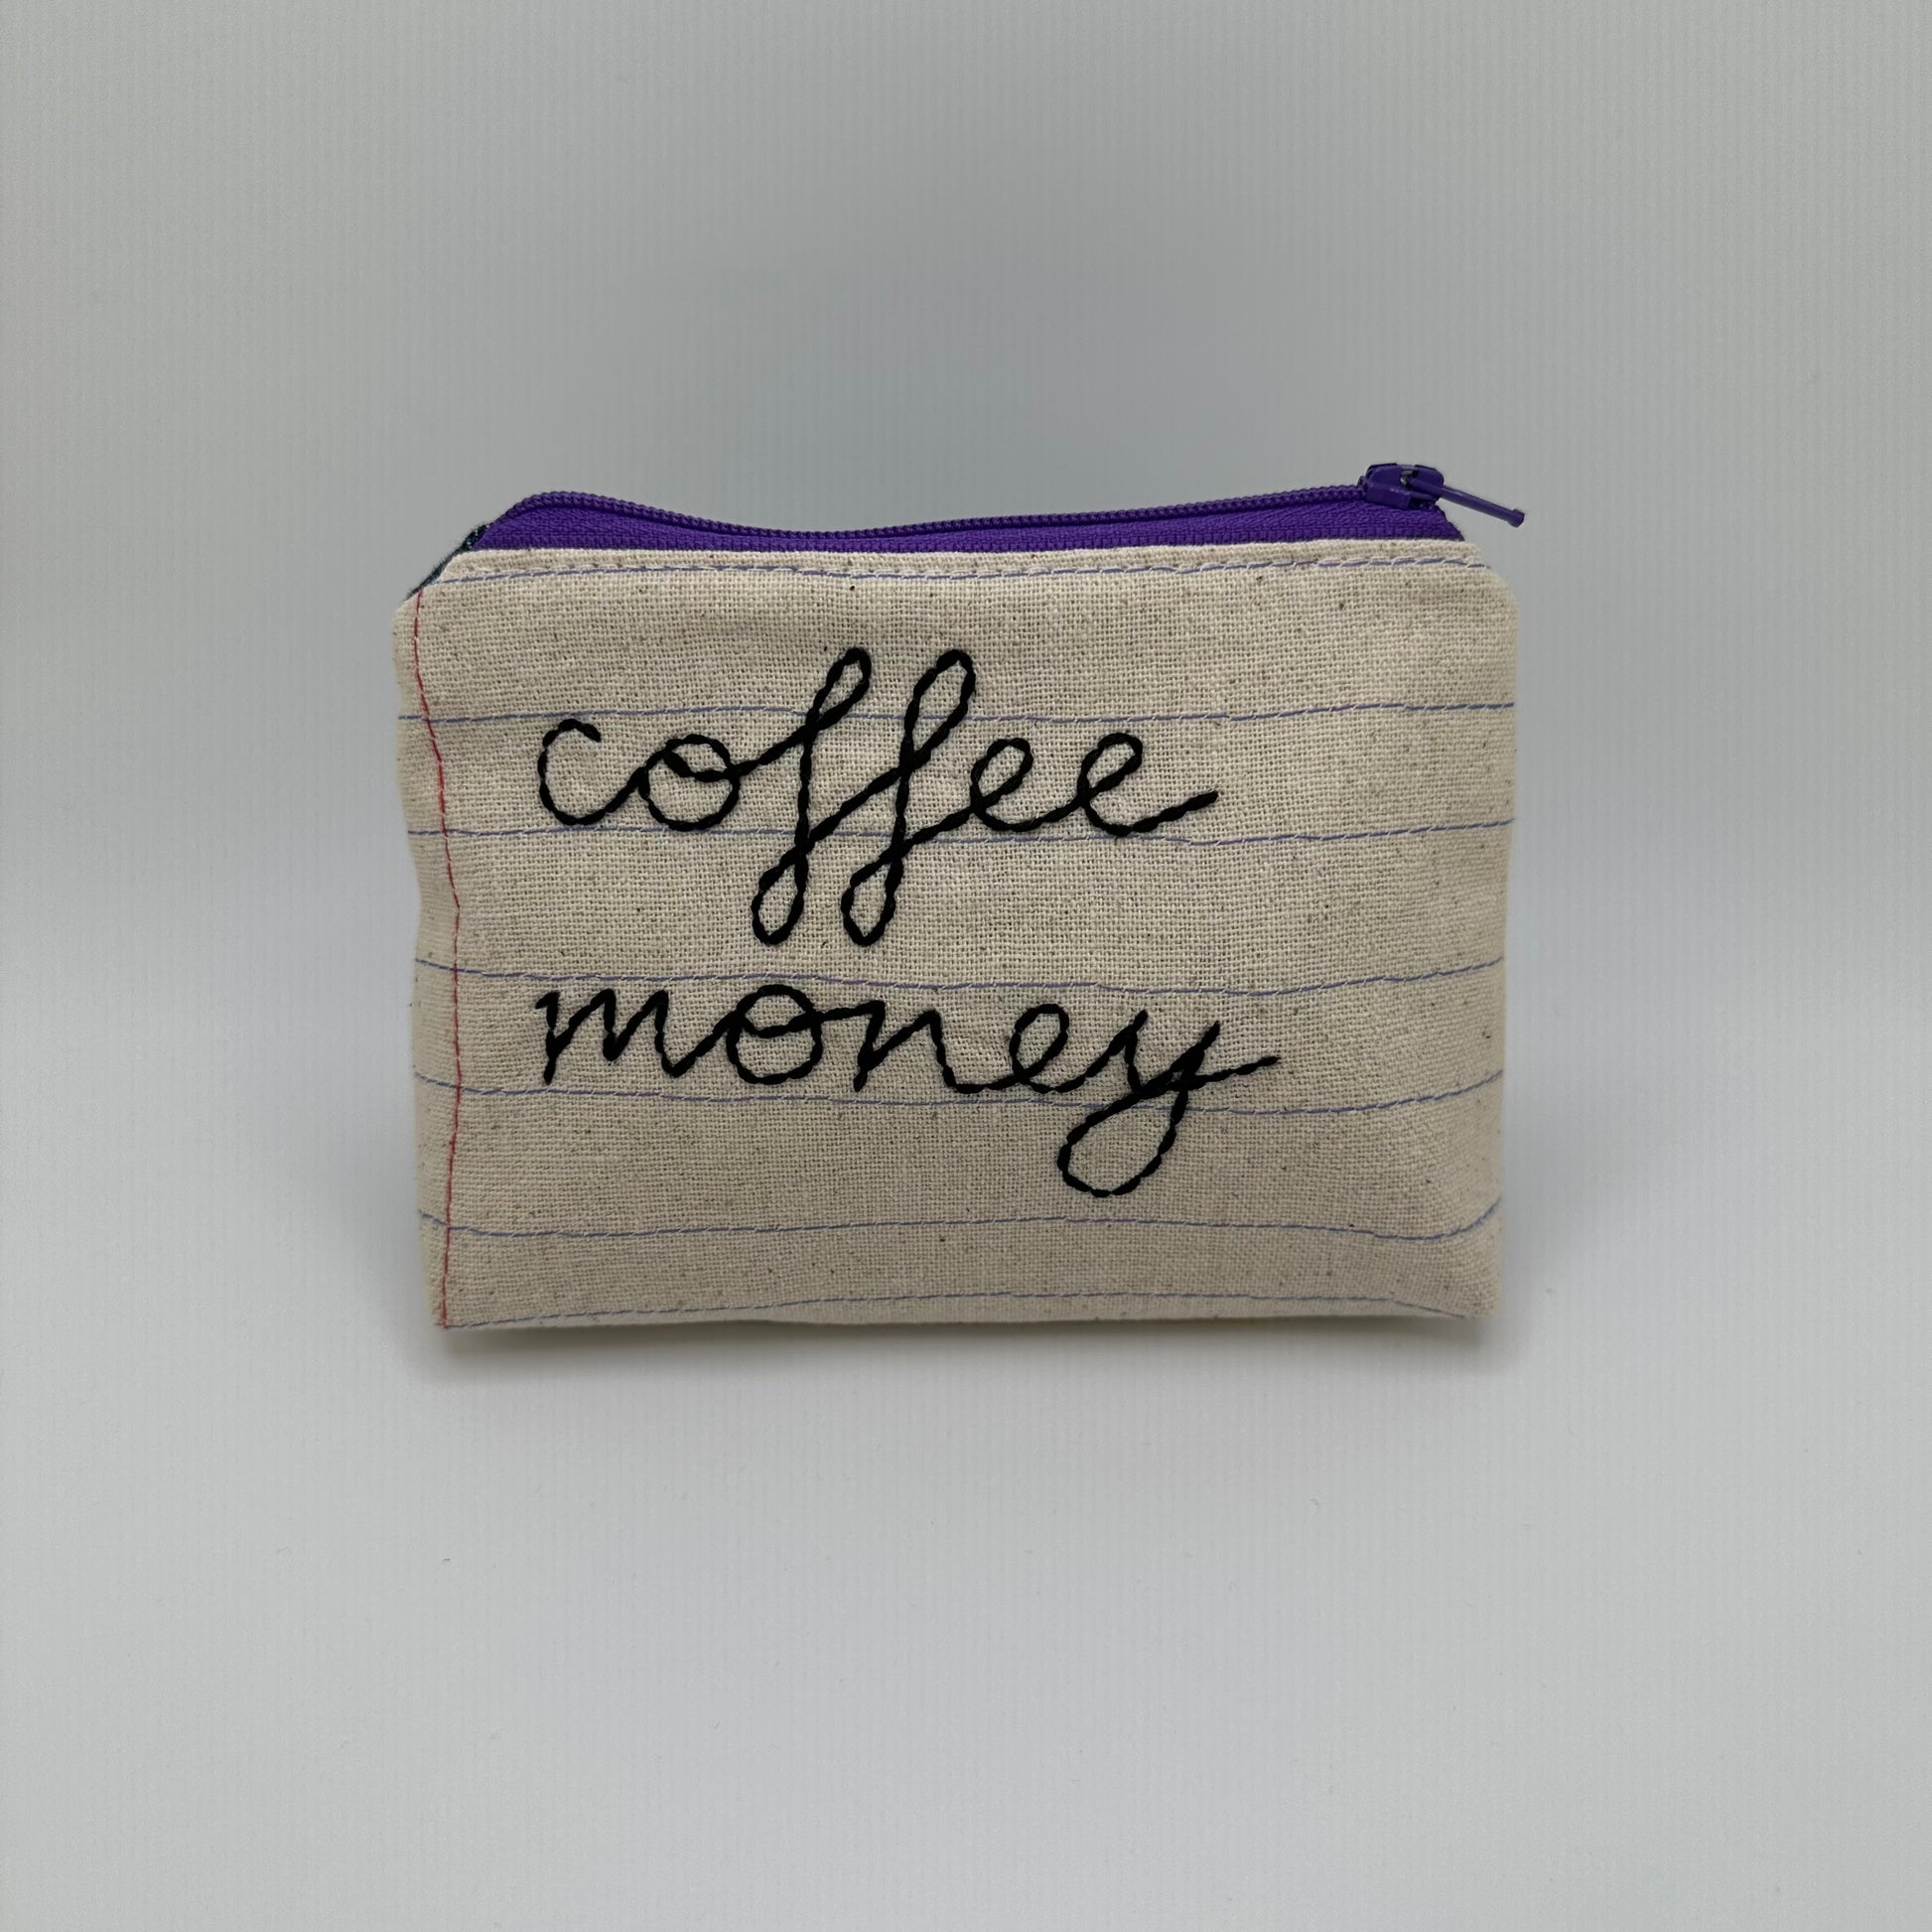 Handmade pouch sewn with the words "coffee money"